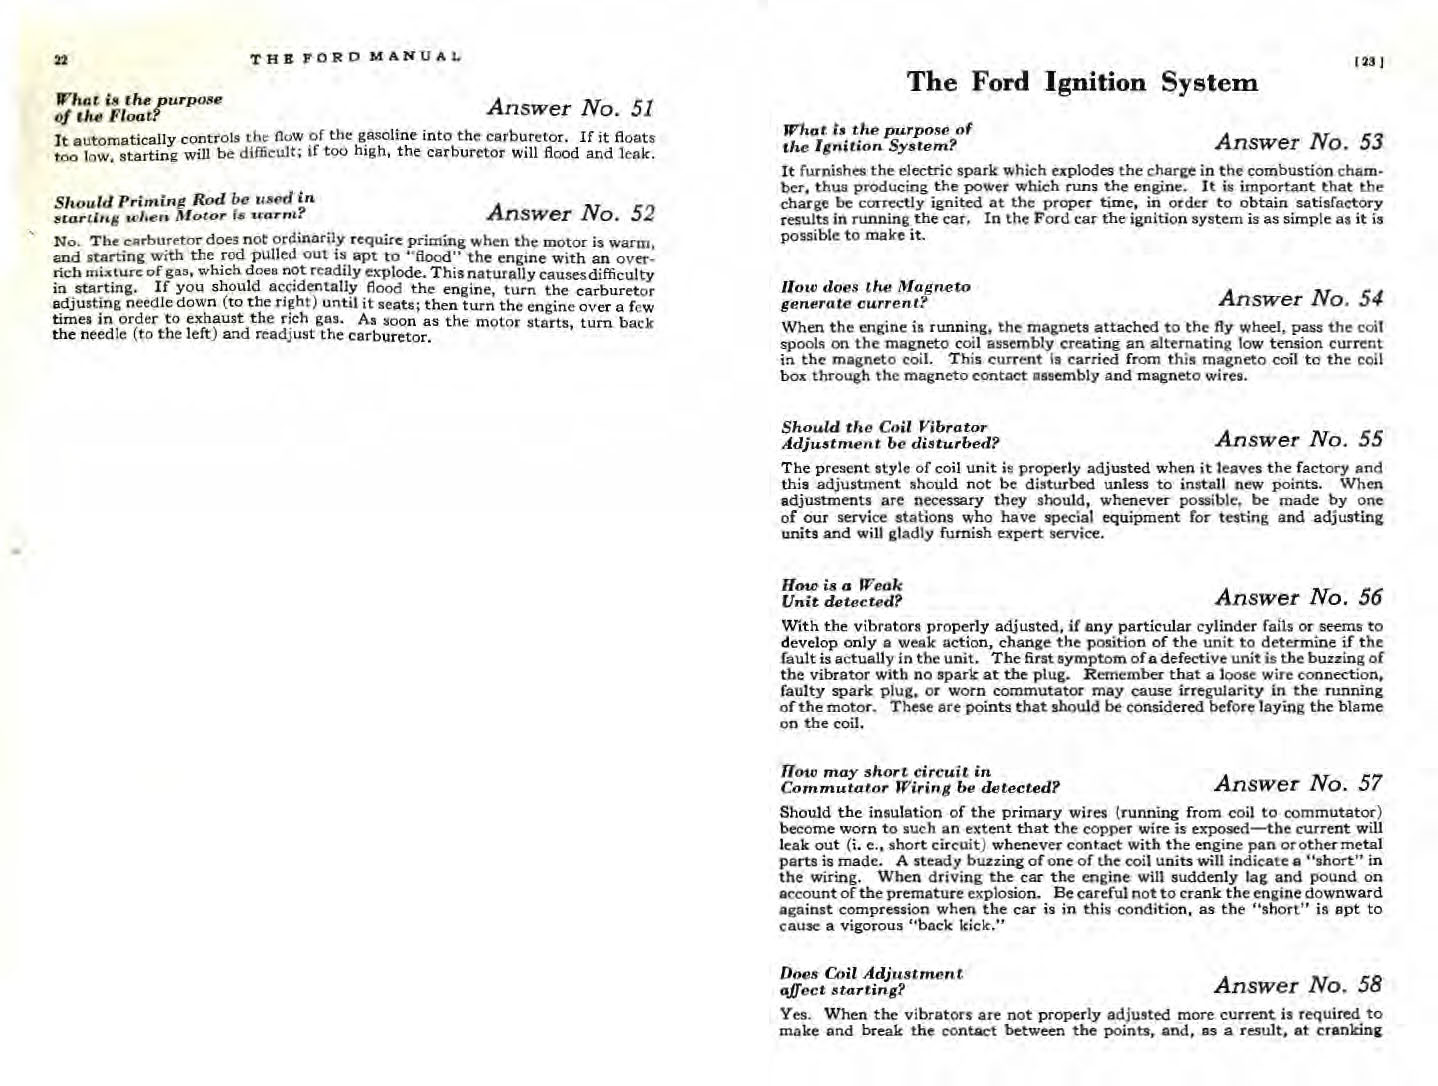 1926_Ford_Owners_Manual-22-23